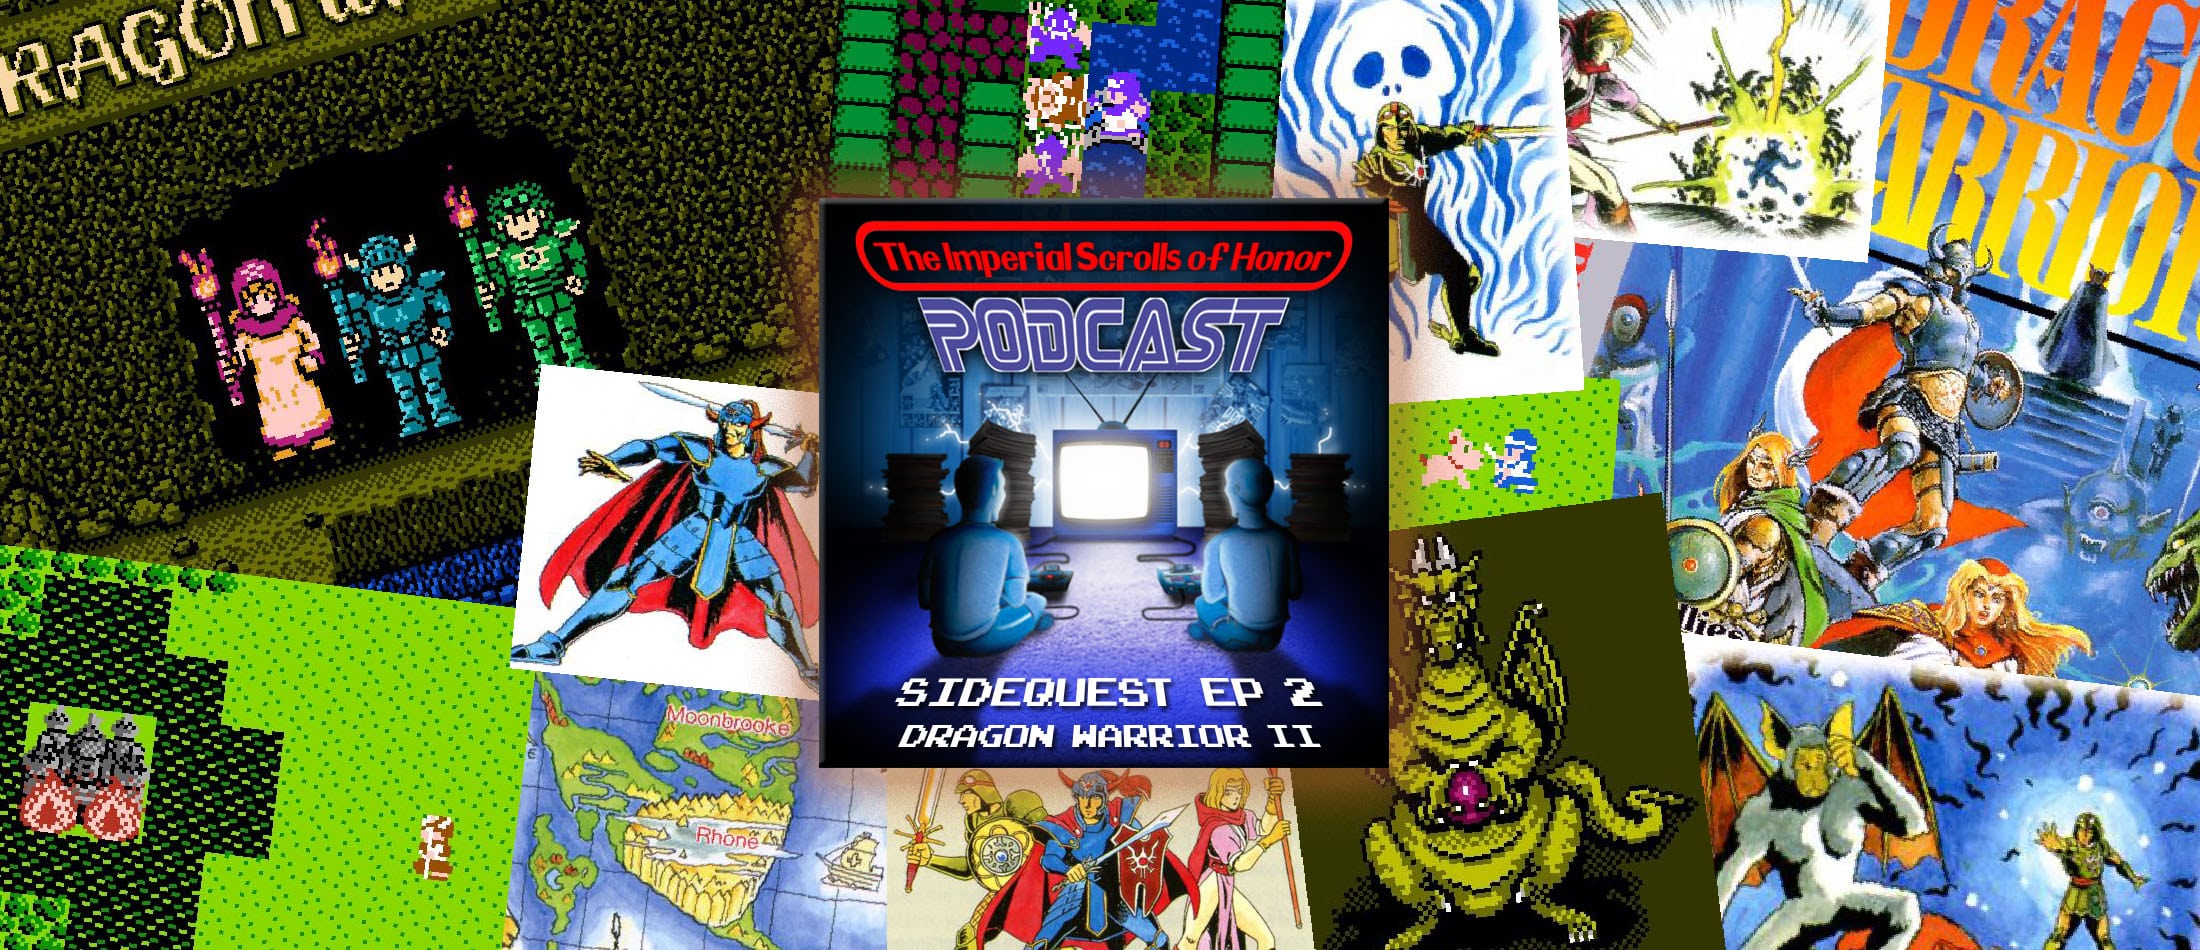 The Imperial Scrolls of Honor Podcast - Dragon Warrior II SIDEQUEST Ep 2